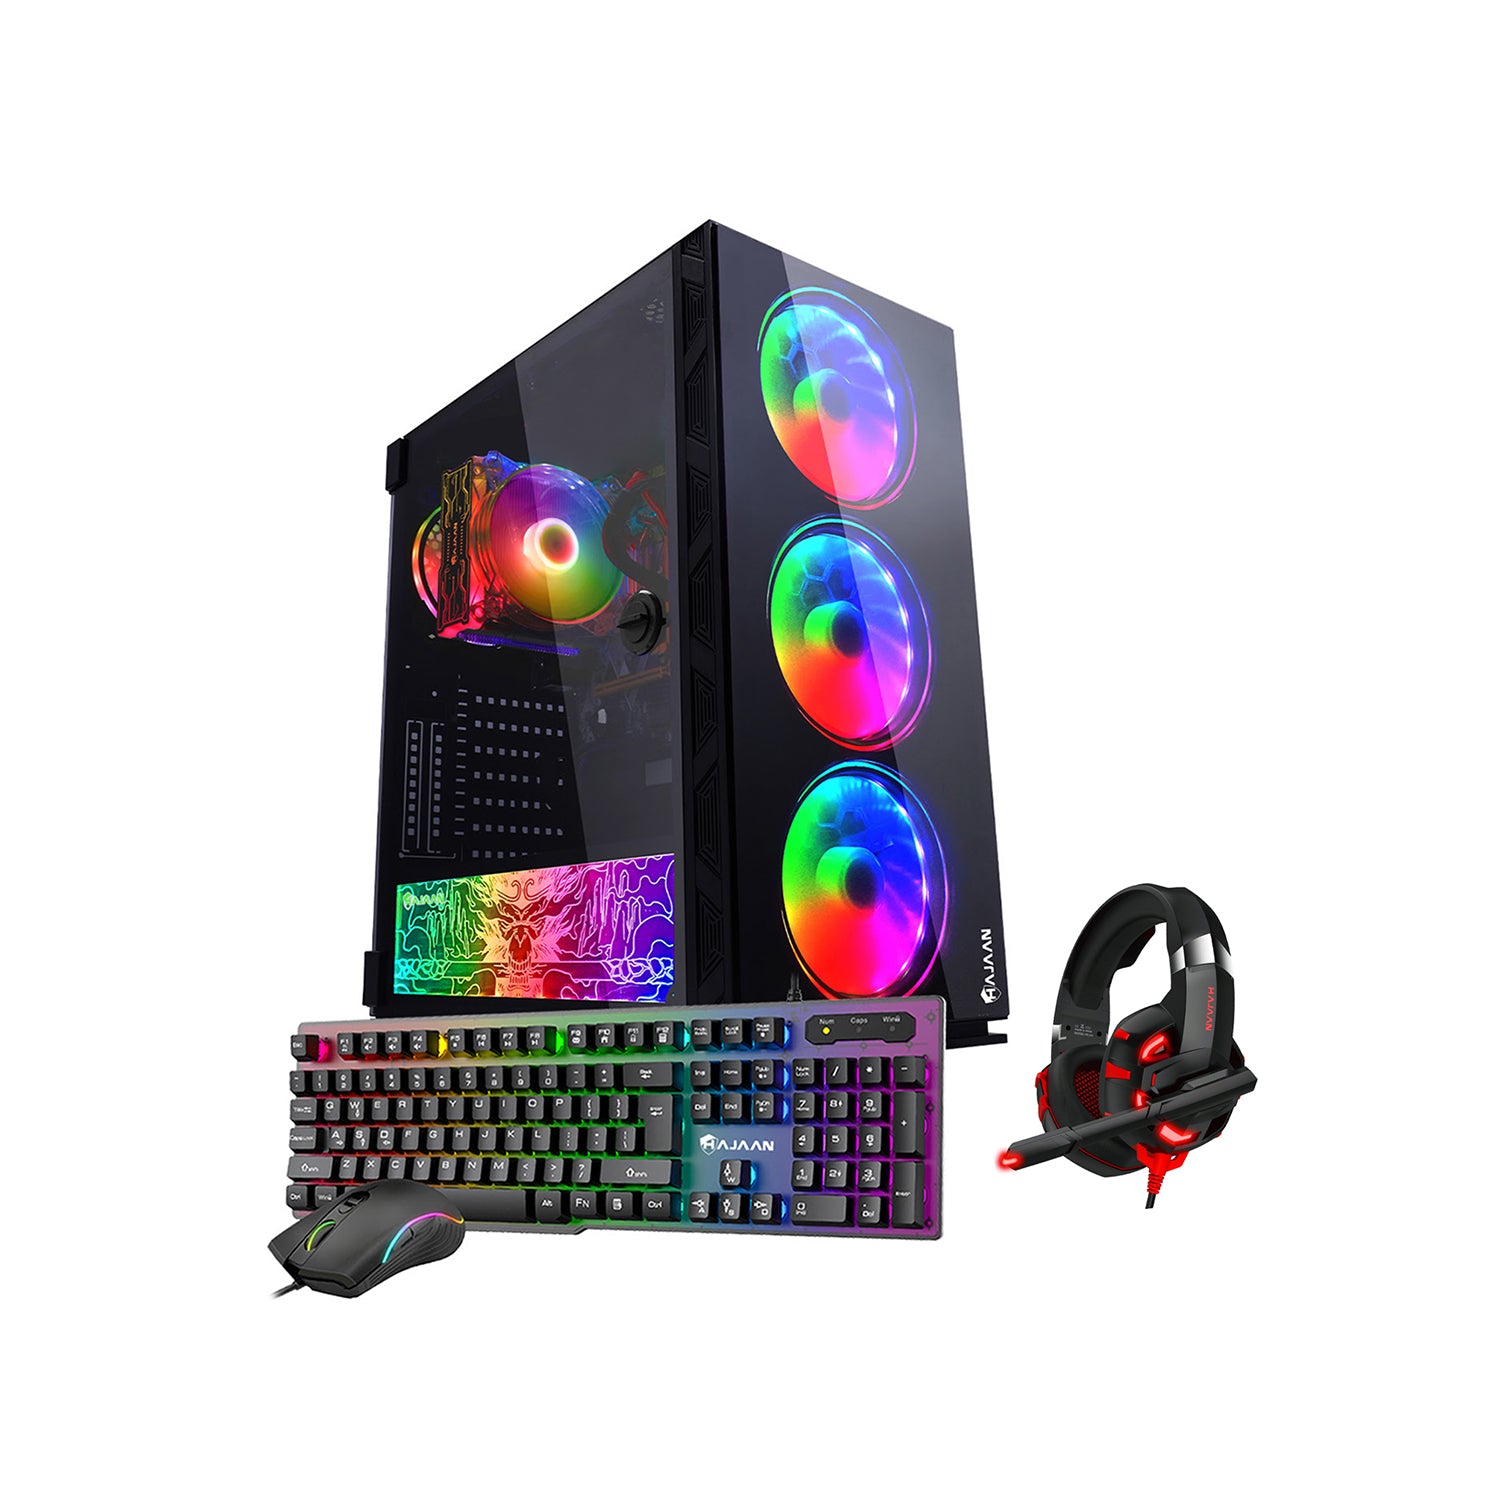 HAJAAN BREEZE PRO Gaming PC Desktop Tower Intel Core i7 Processor up to 4.0GHz 32GB DDR4 RAM 1TB SSD GeForce RTX 3060 12GB GDDR6 HDMI with RGB Gaming Keyboard Mouse, Headset, Wifi Ready Windows 10 Pro